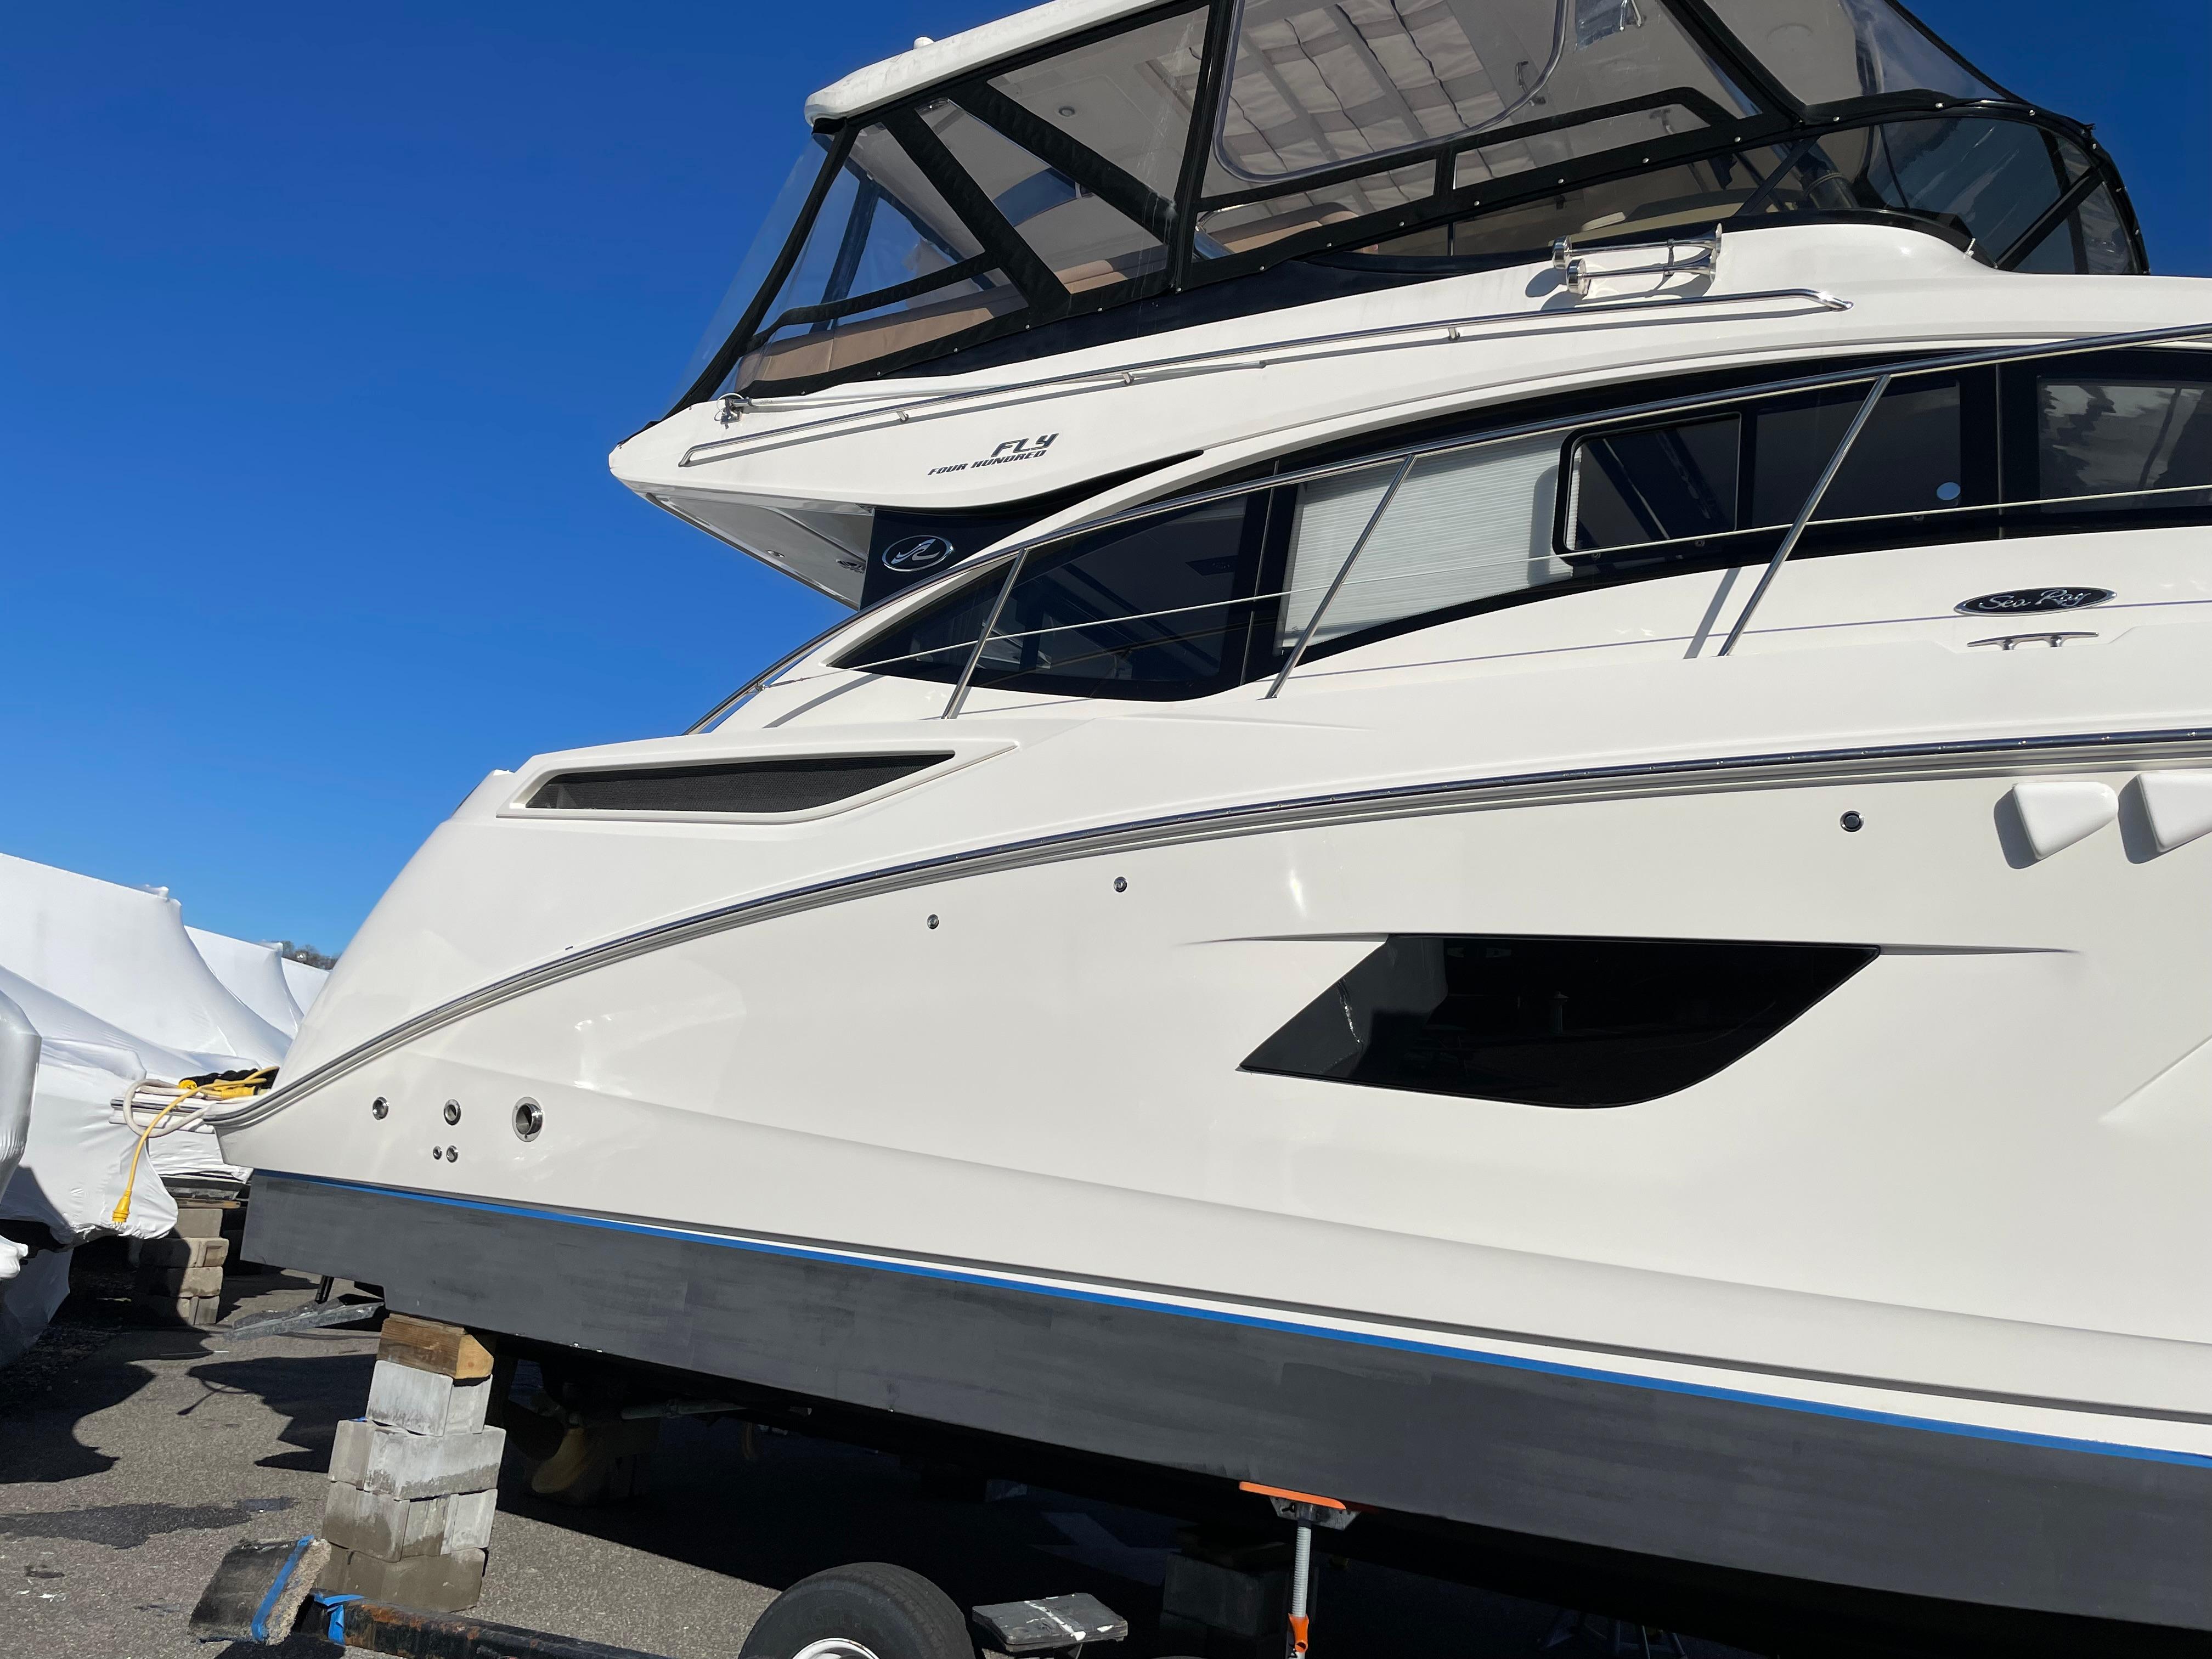 Boats for sale  Sea ray boat, Boat accessories, Power boats for sale